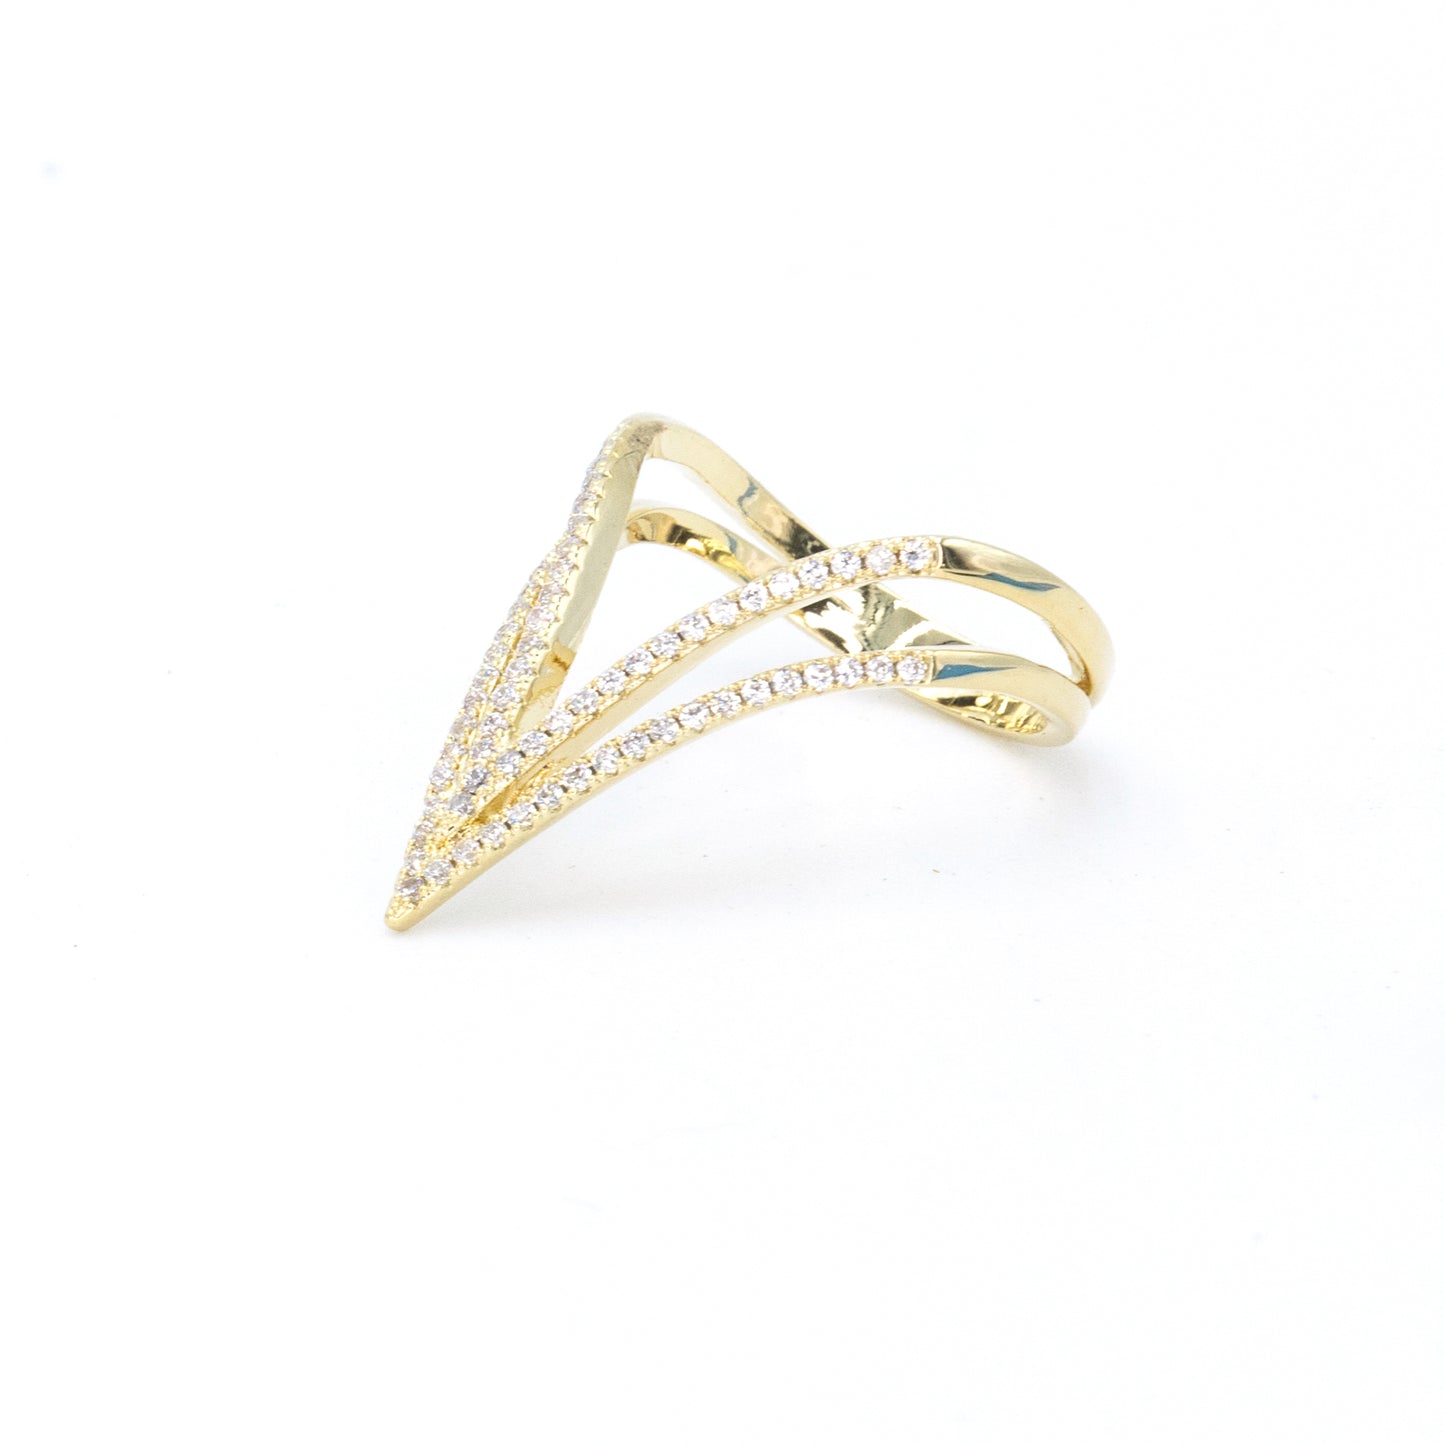 The Pave V Ring in Gold